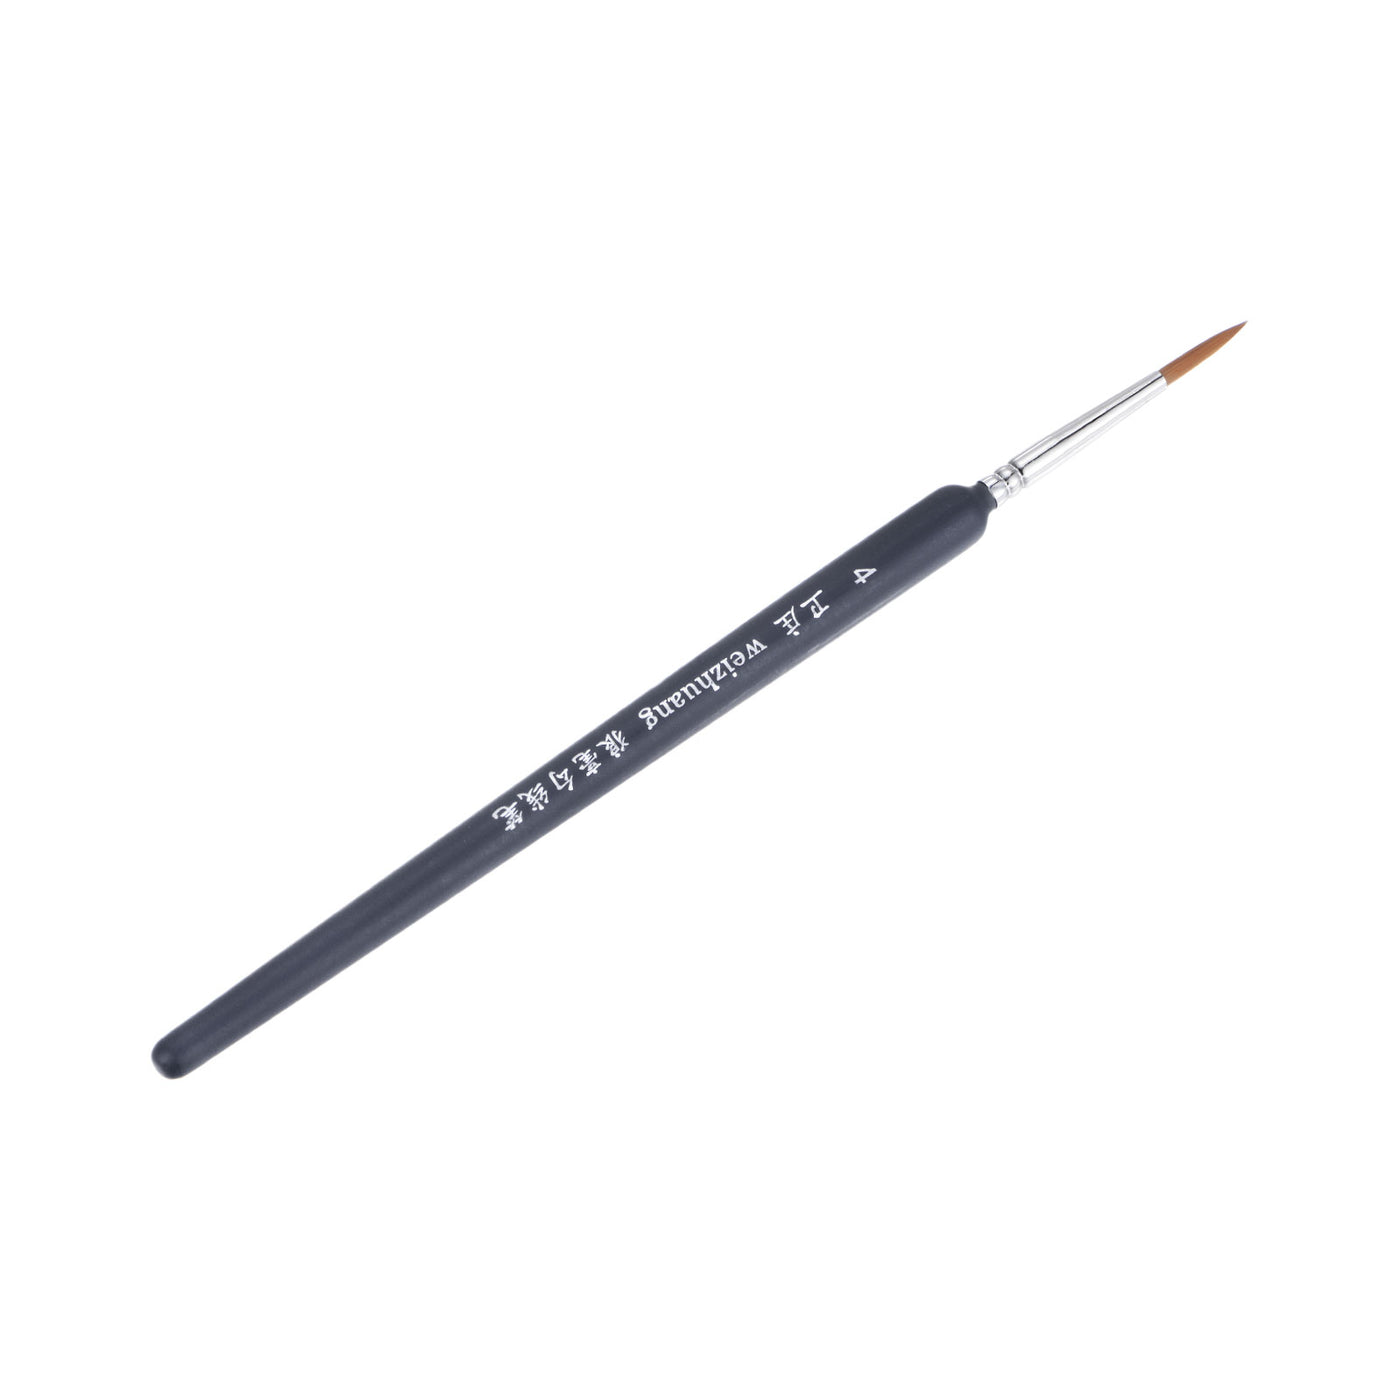 uxcell Uxcell Detailing Paint Brush 0.57" Bristle Length with Dark Blue Wood Handle 2Pcs